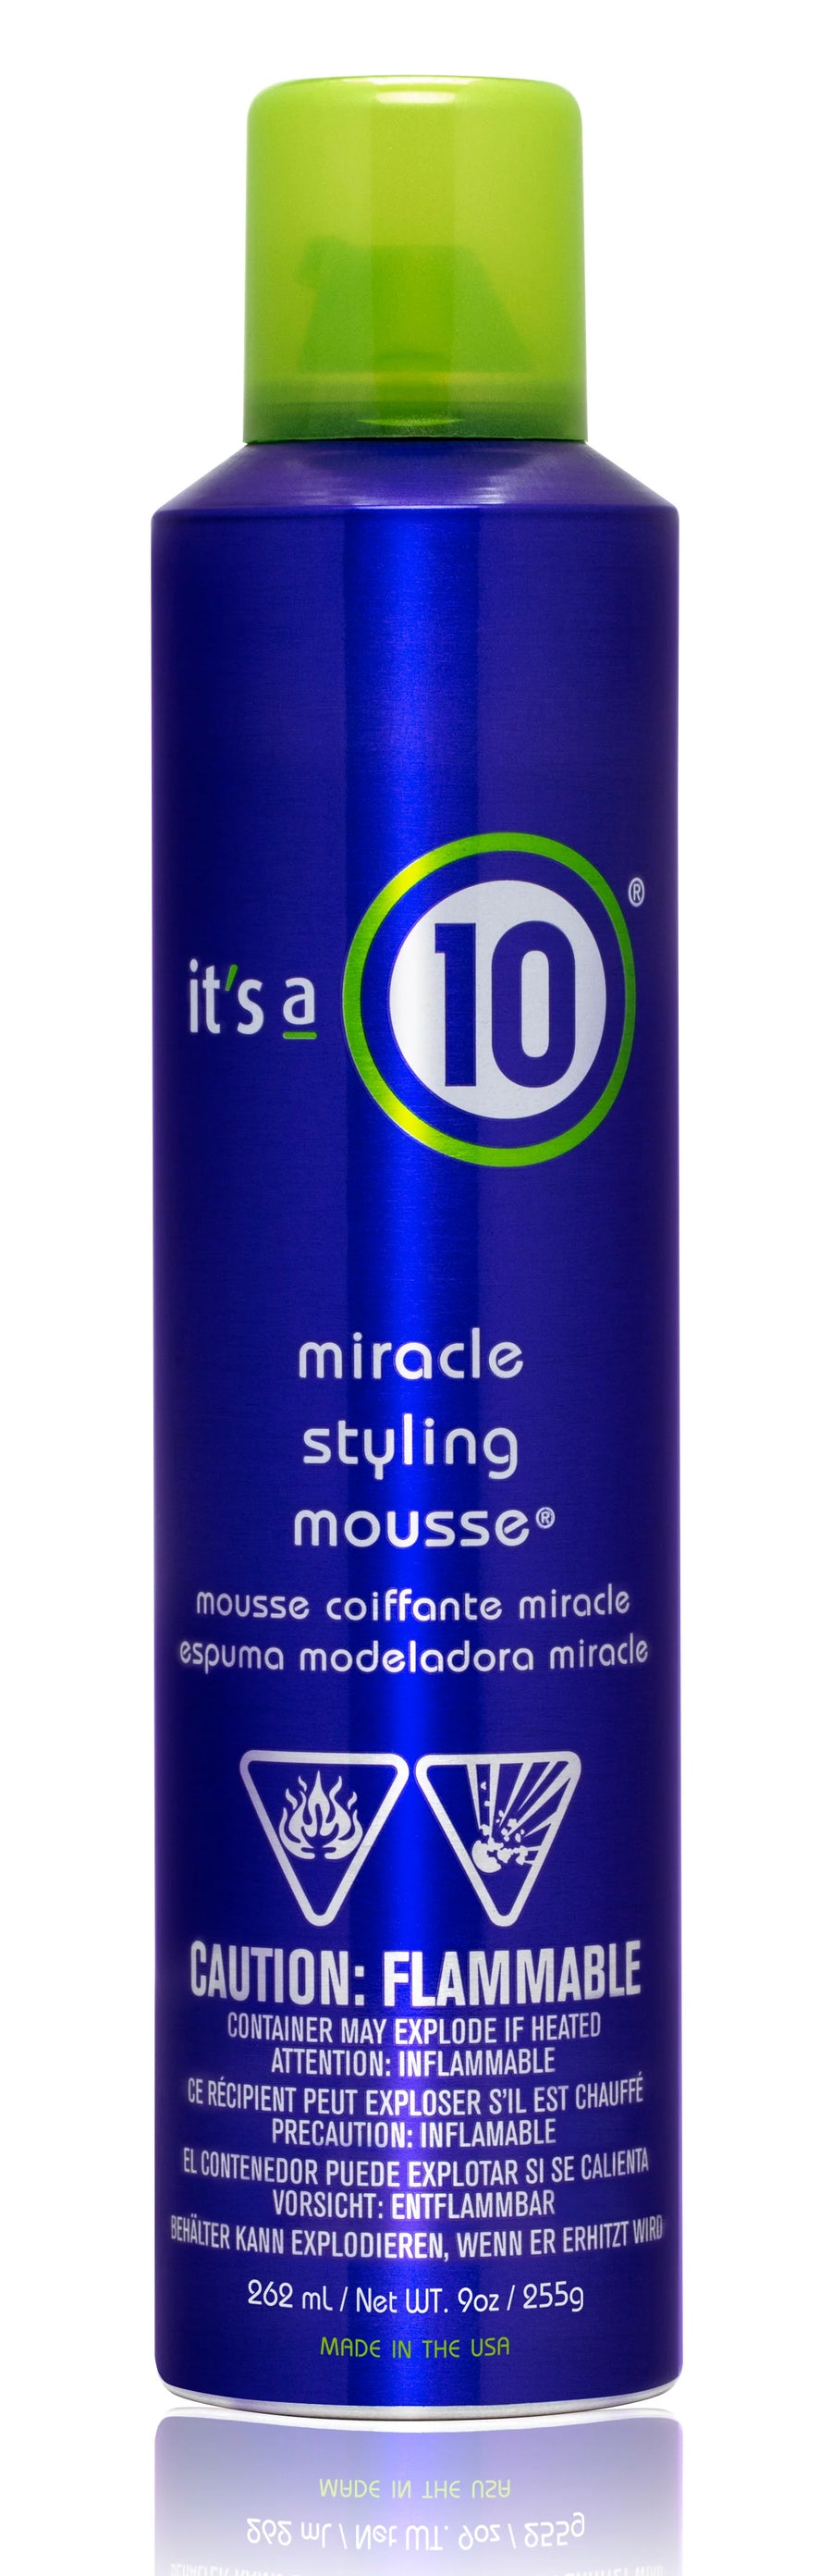 It's a 10 Miracle Styling Mousse 9 oz bottle image